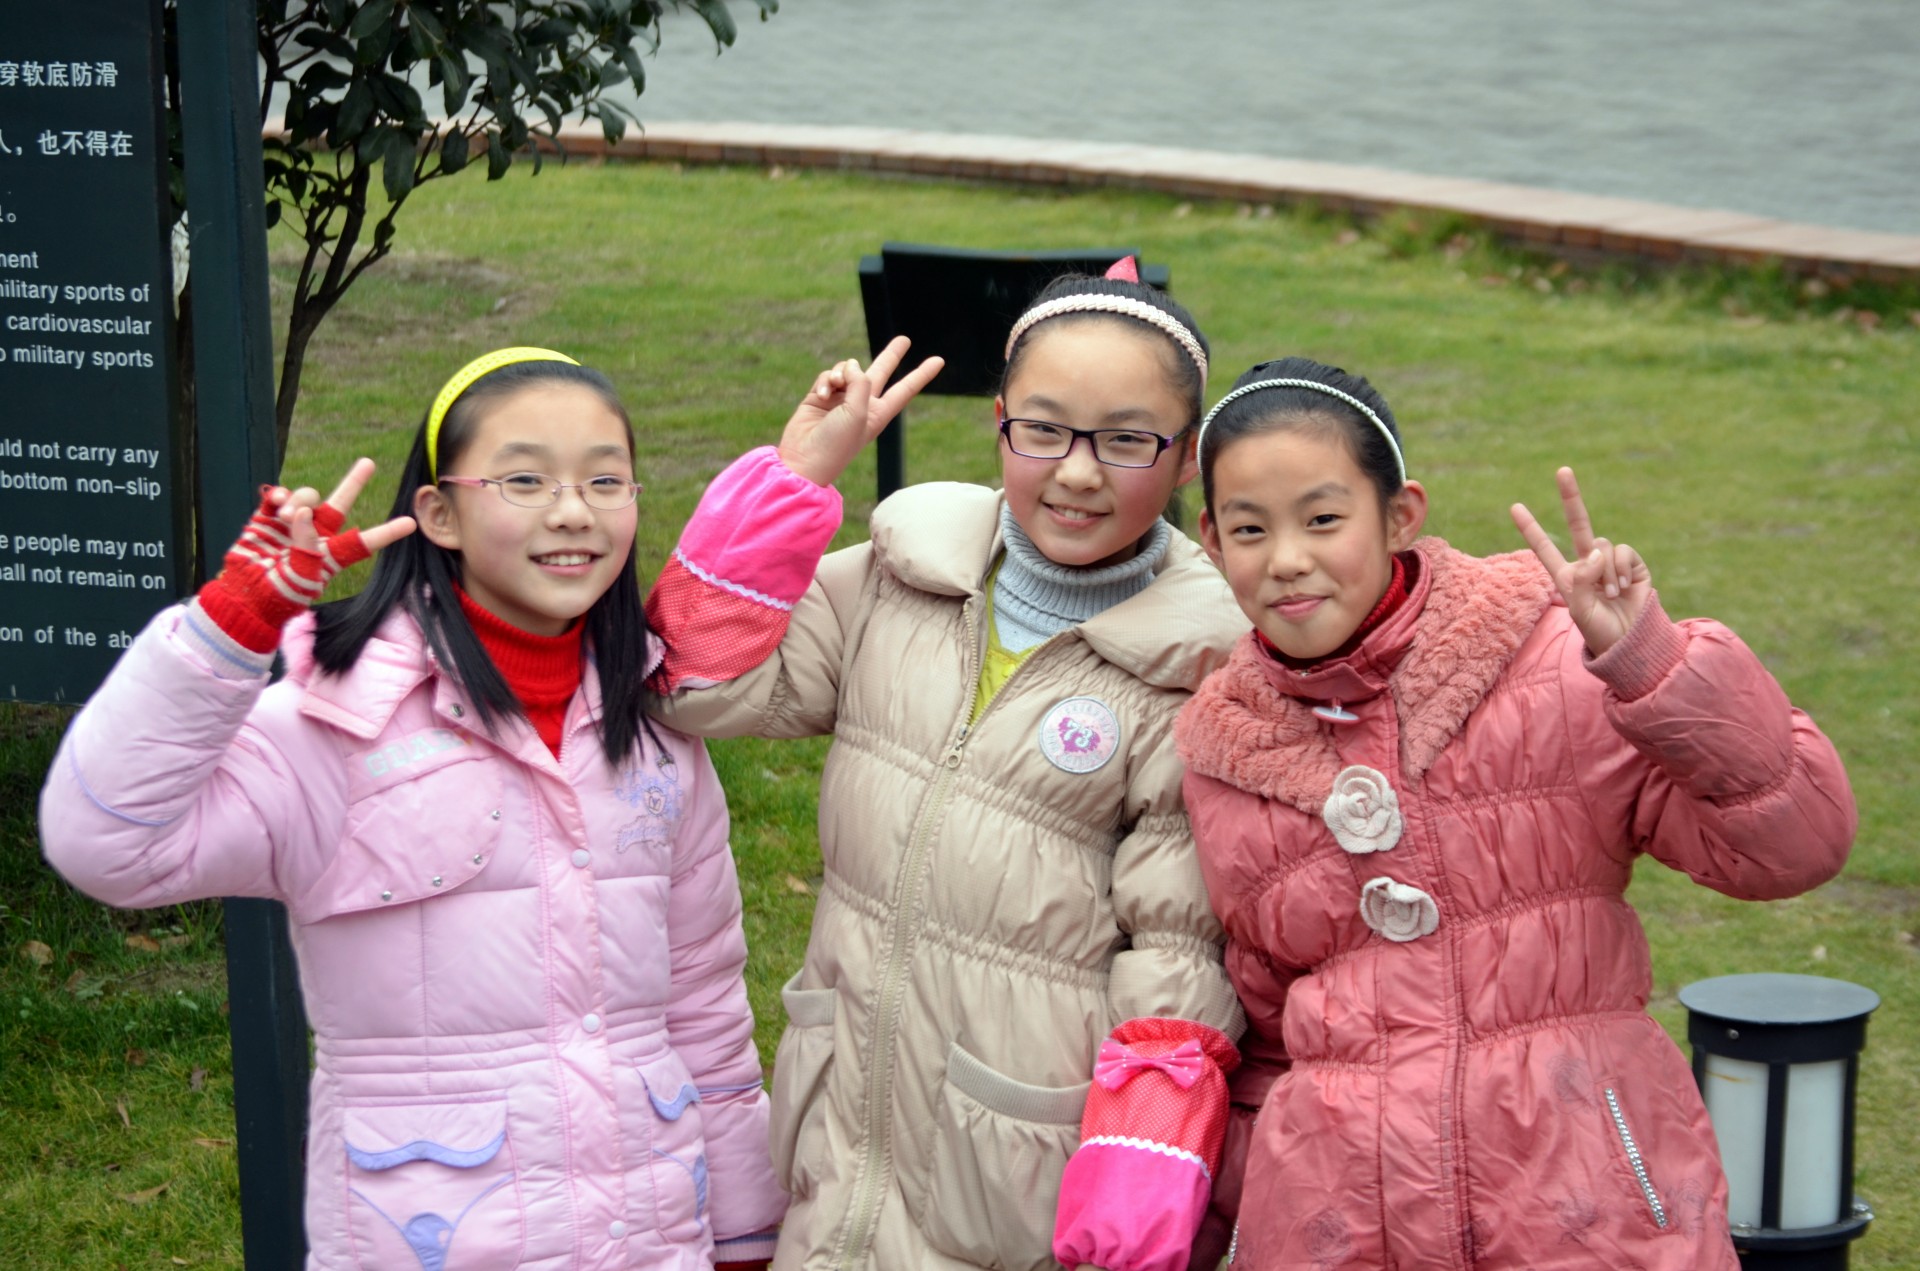 Three smiling girls posing with peace signs for a picture.